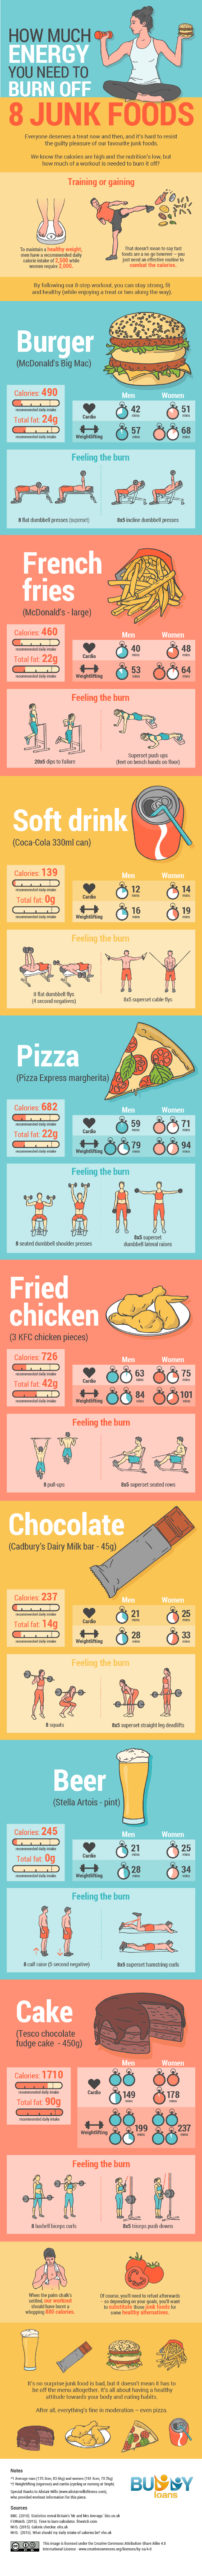 How Much Do You Have To Work Out To Burn Off The Junk Food You Eat?